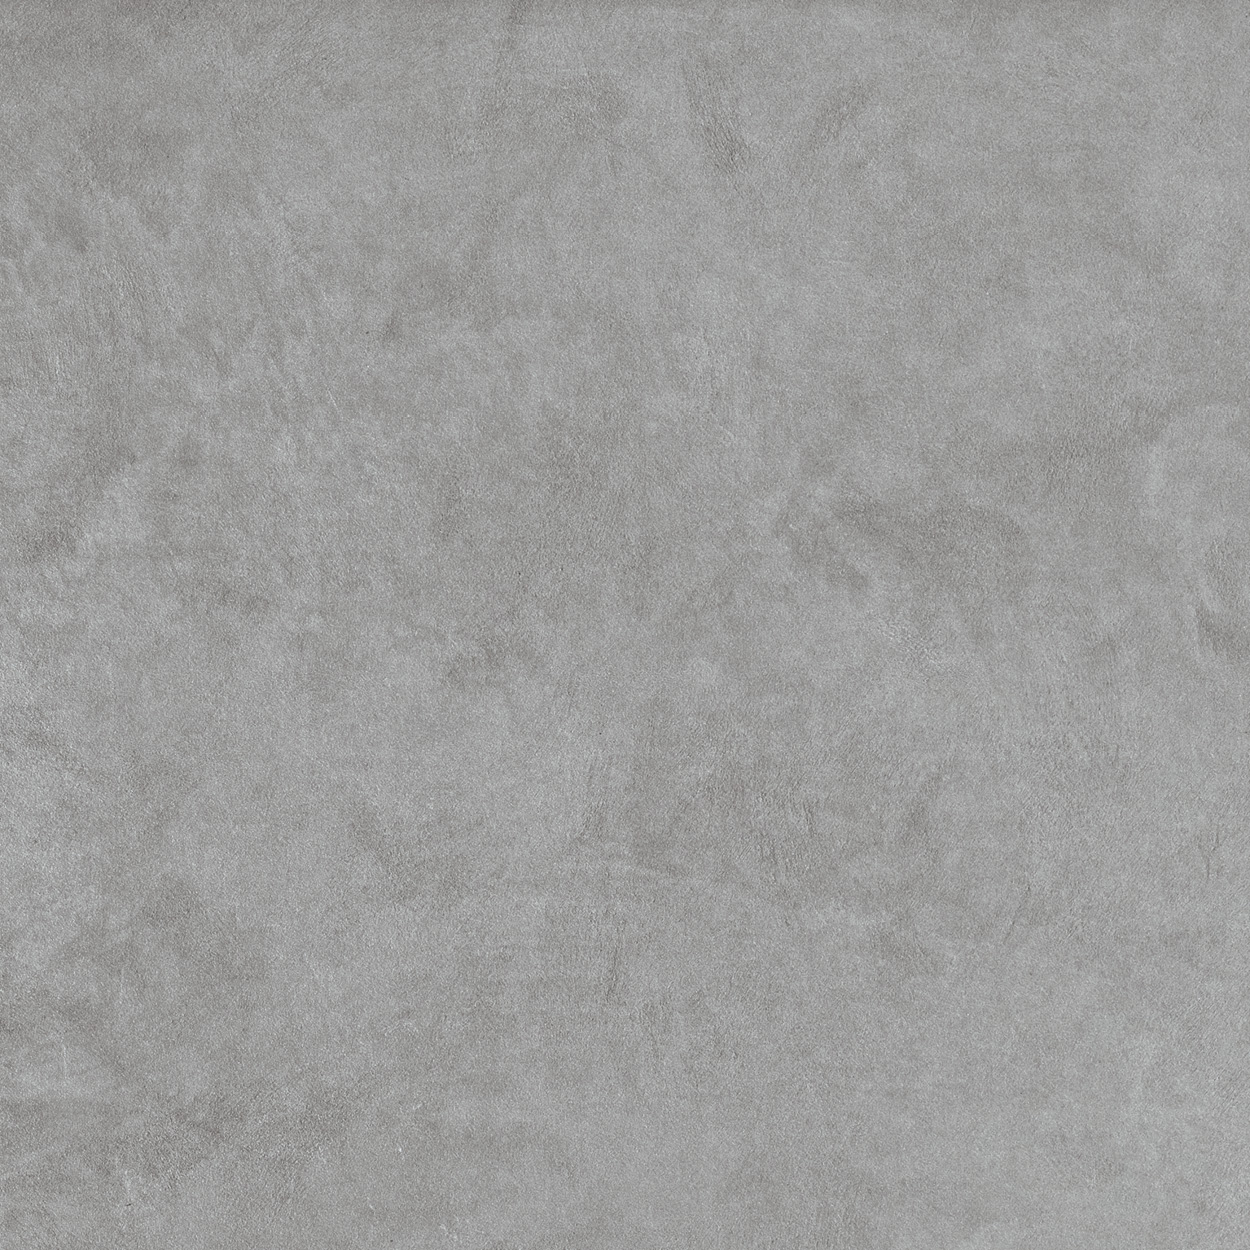 32 x 32 Seamless CL_01 Porcelain tile (SPECIAL ORDER ONLY)